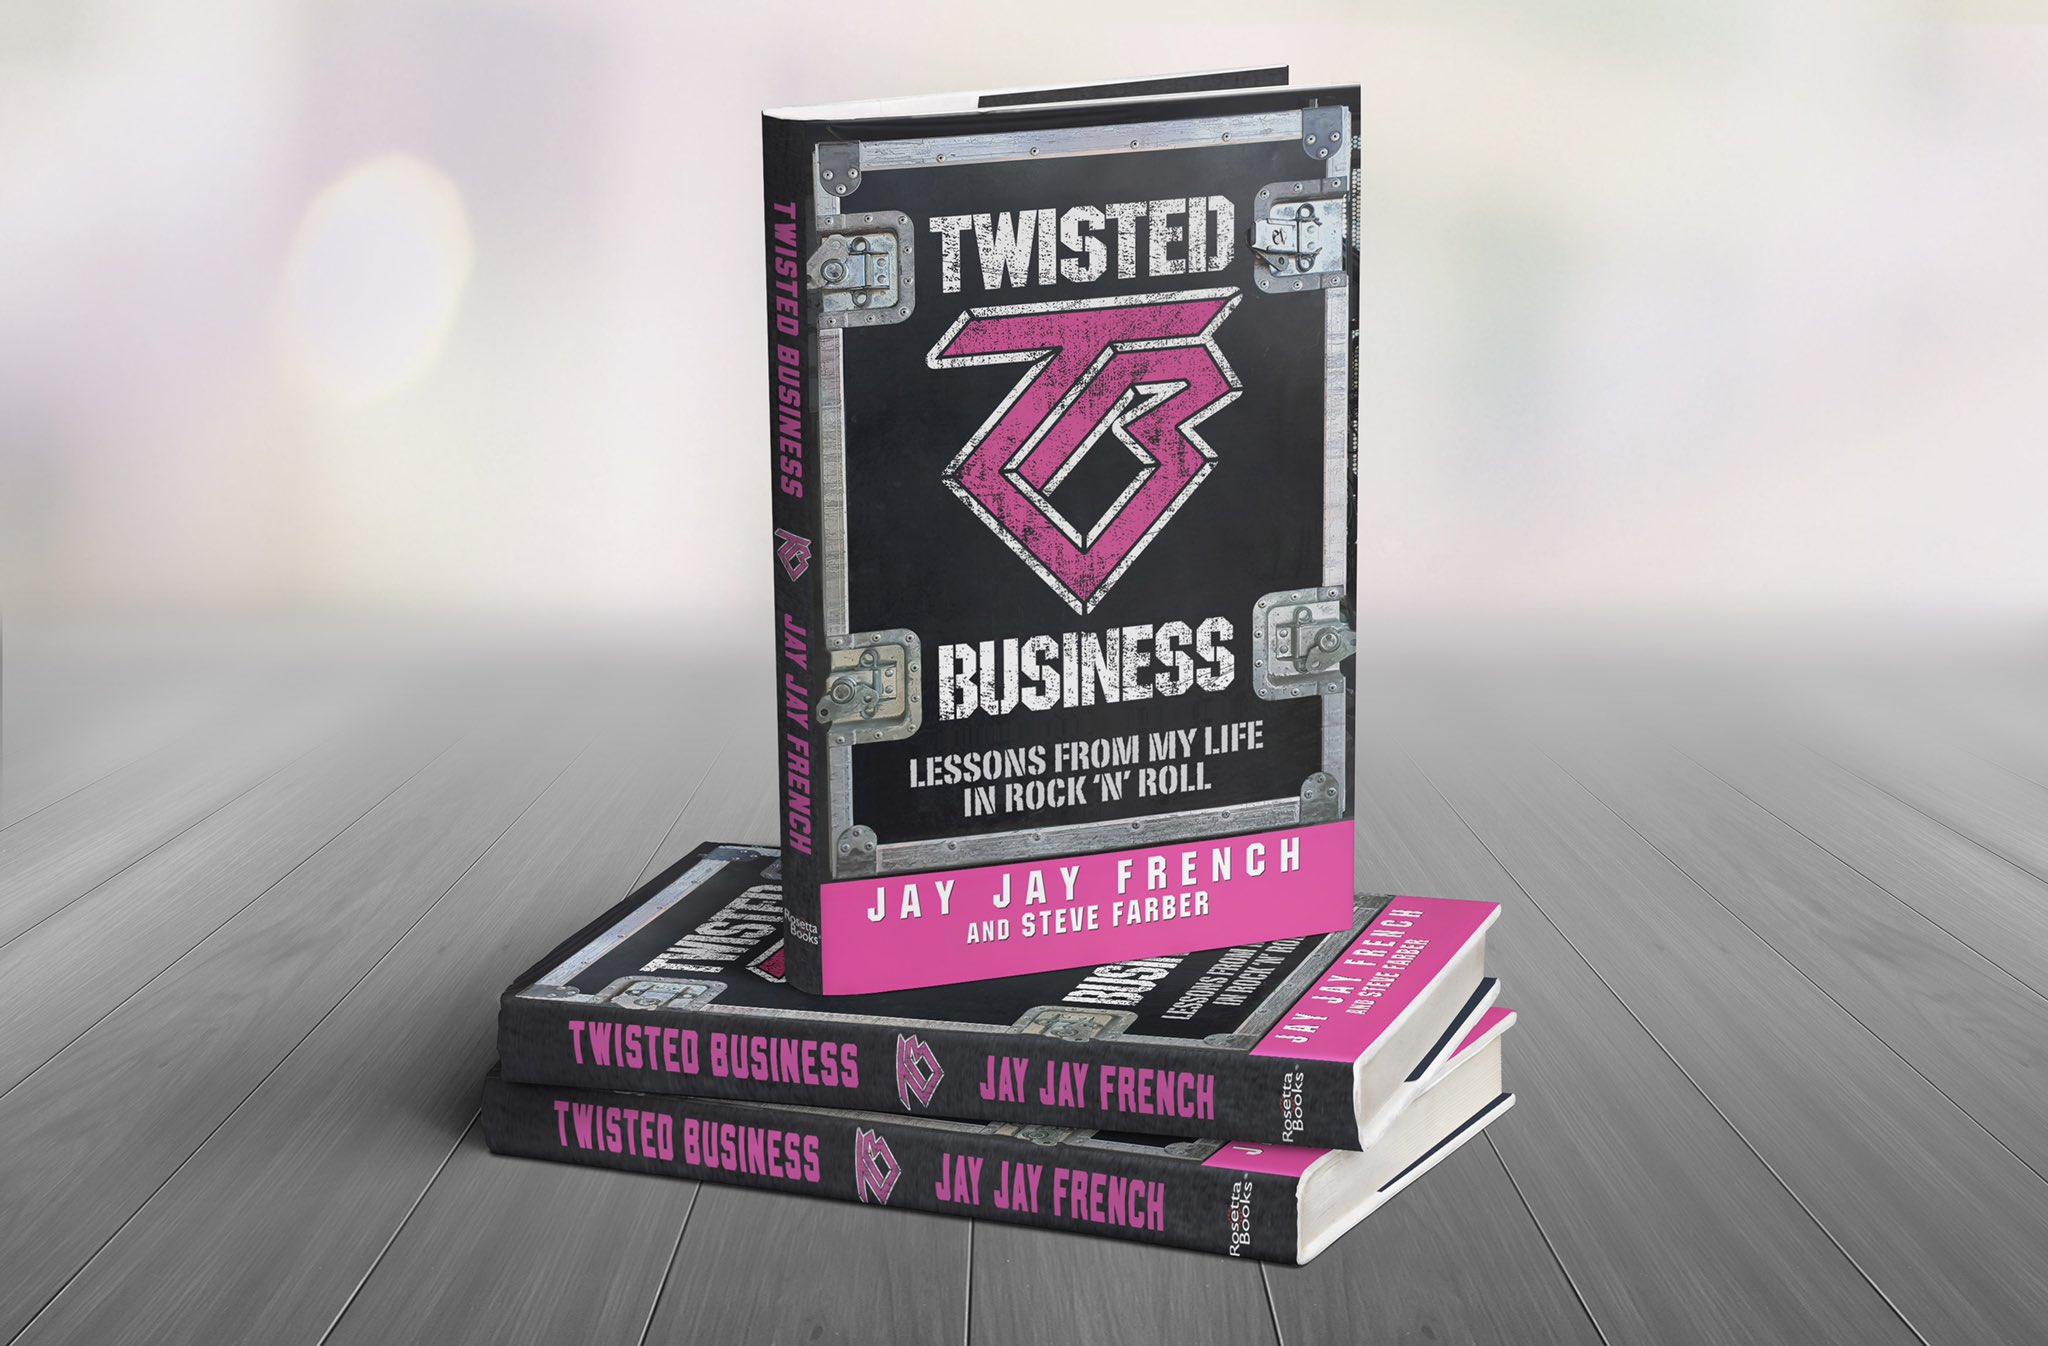 Jay Jay French on Twitter: "You can now PRE-ORDER my book, TWISTED BUSINESS:  Lessons from my life in Rock n Roll at the link below!  https://t.co/erndae9R3b https://t.co/5yUS90xSYm" / Twitter